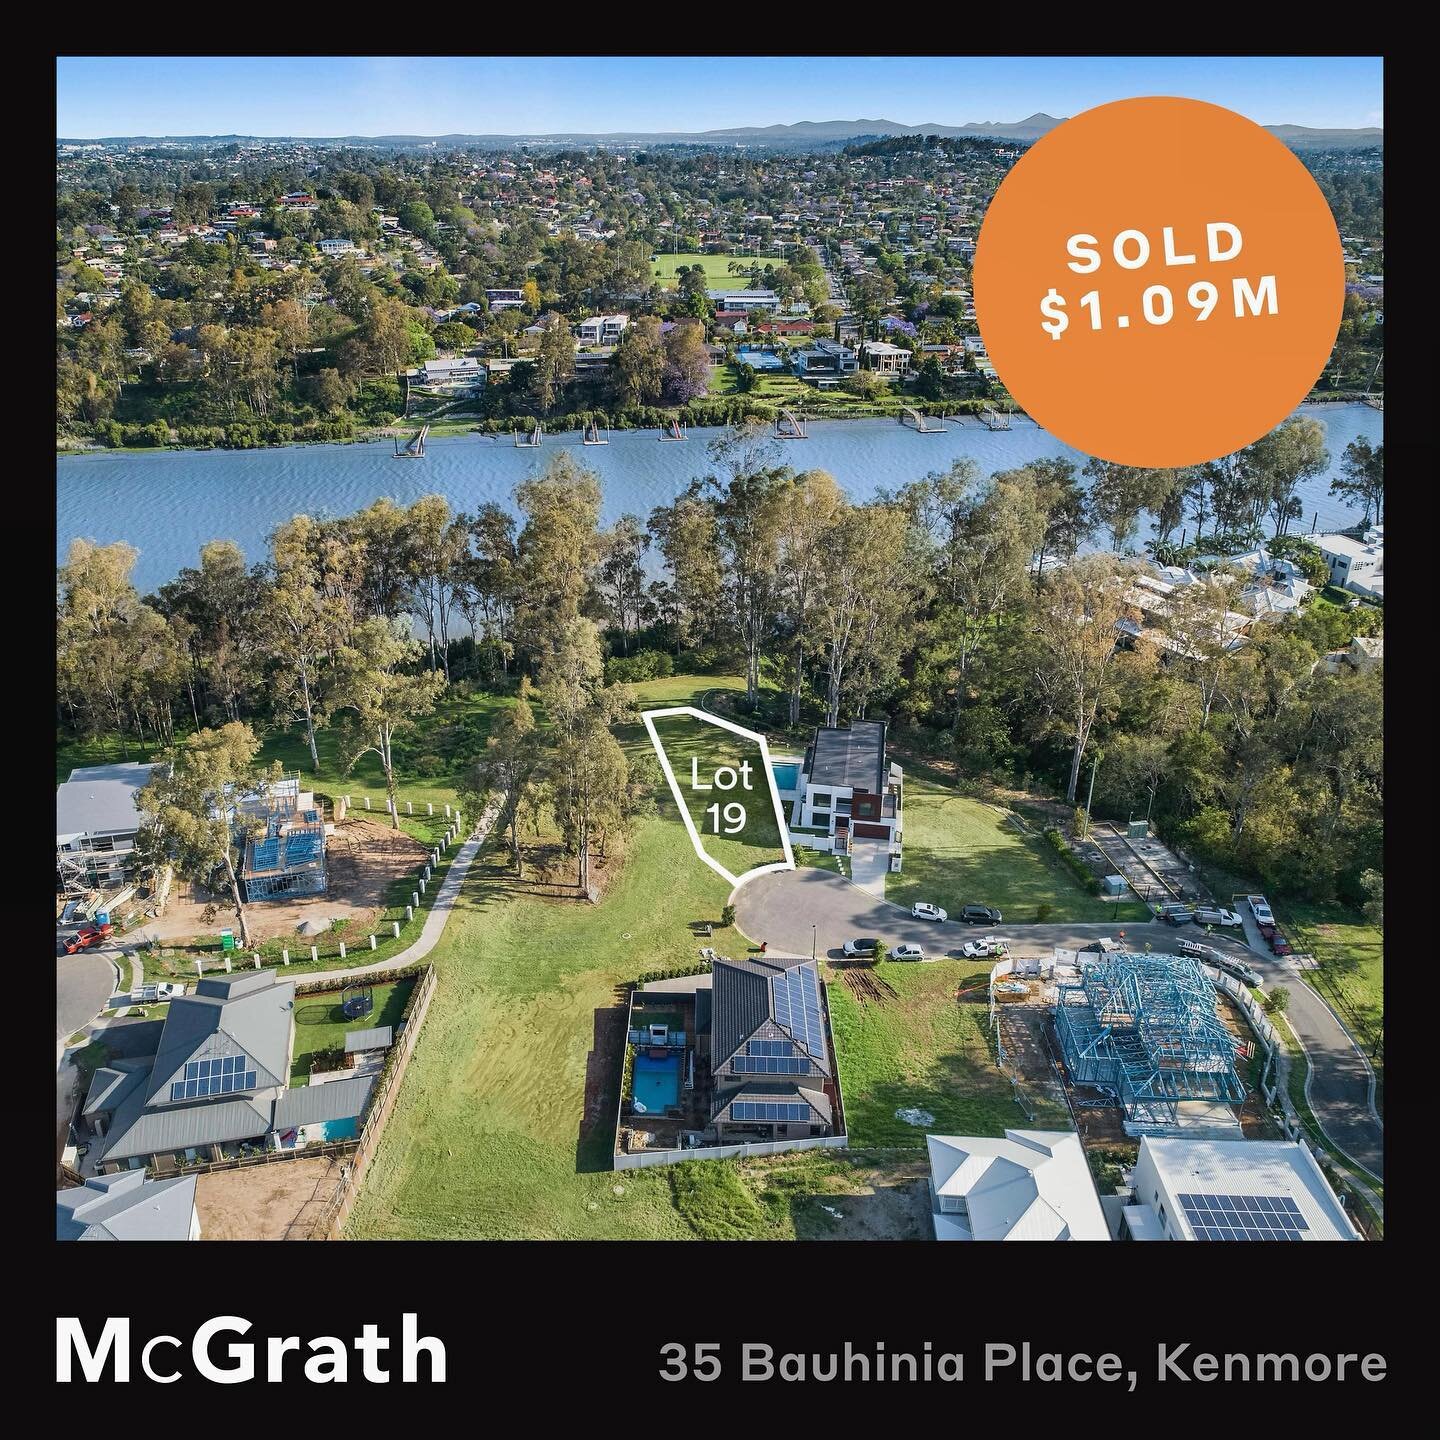 KENMORE LAND RECORD PRICE!

J U S T  S O L D
35 Bauhinia Place, Kenmore

Super excited to announce the details of our latest sale in Kenmore, with multiple offers and hot competition, this vacant 765sqm river side parcel of land has set a new bench m